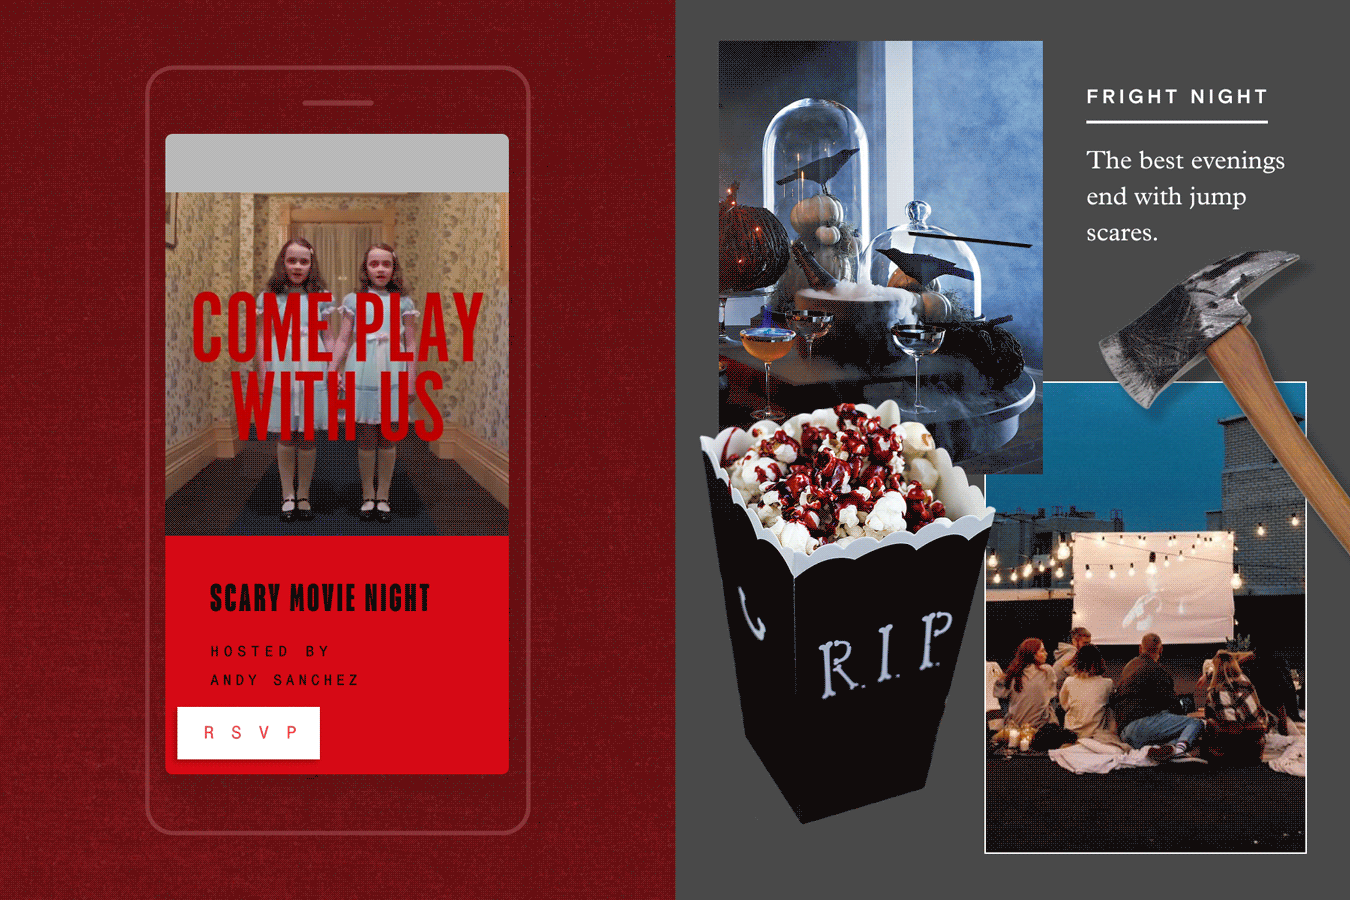 From left: An animated invite with a video of the twins from “The Shining” and the text “Come Play With Us” overlaid, a home decor scene with cocktails and crows, a theme box of popcorn with blood red topping, a photograph of an outdoor movie screen and spectators, a fake hatchet.